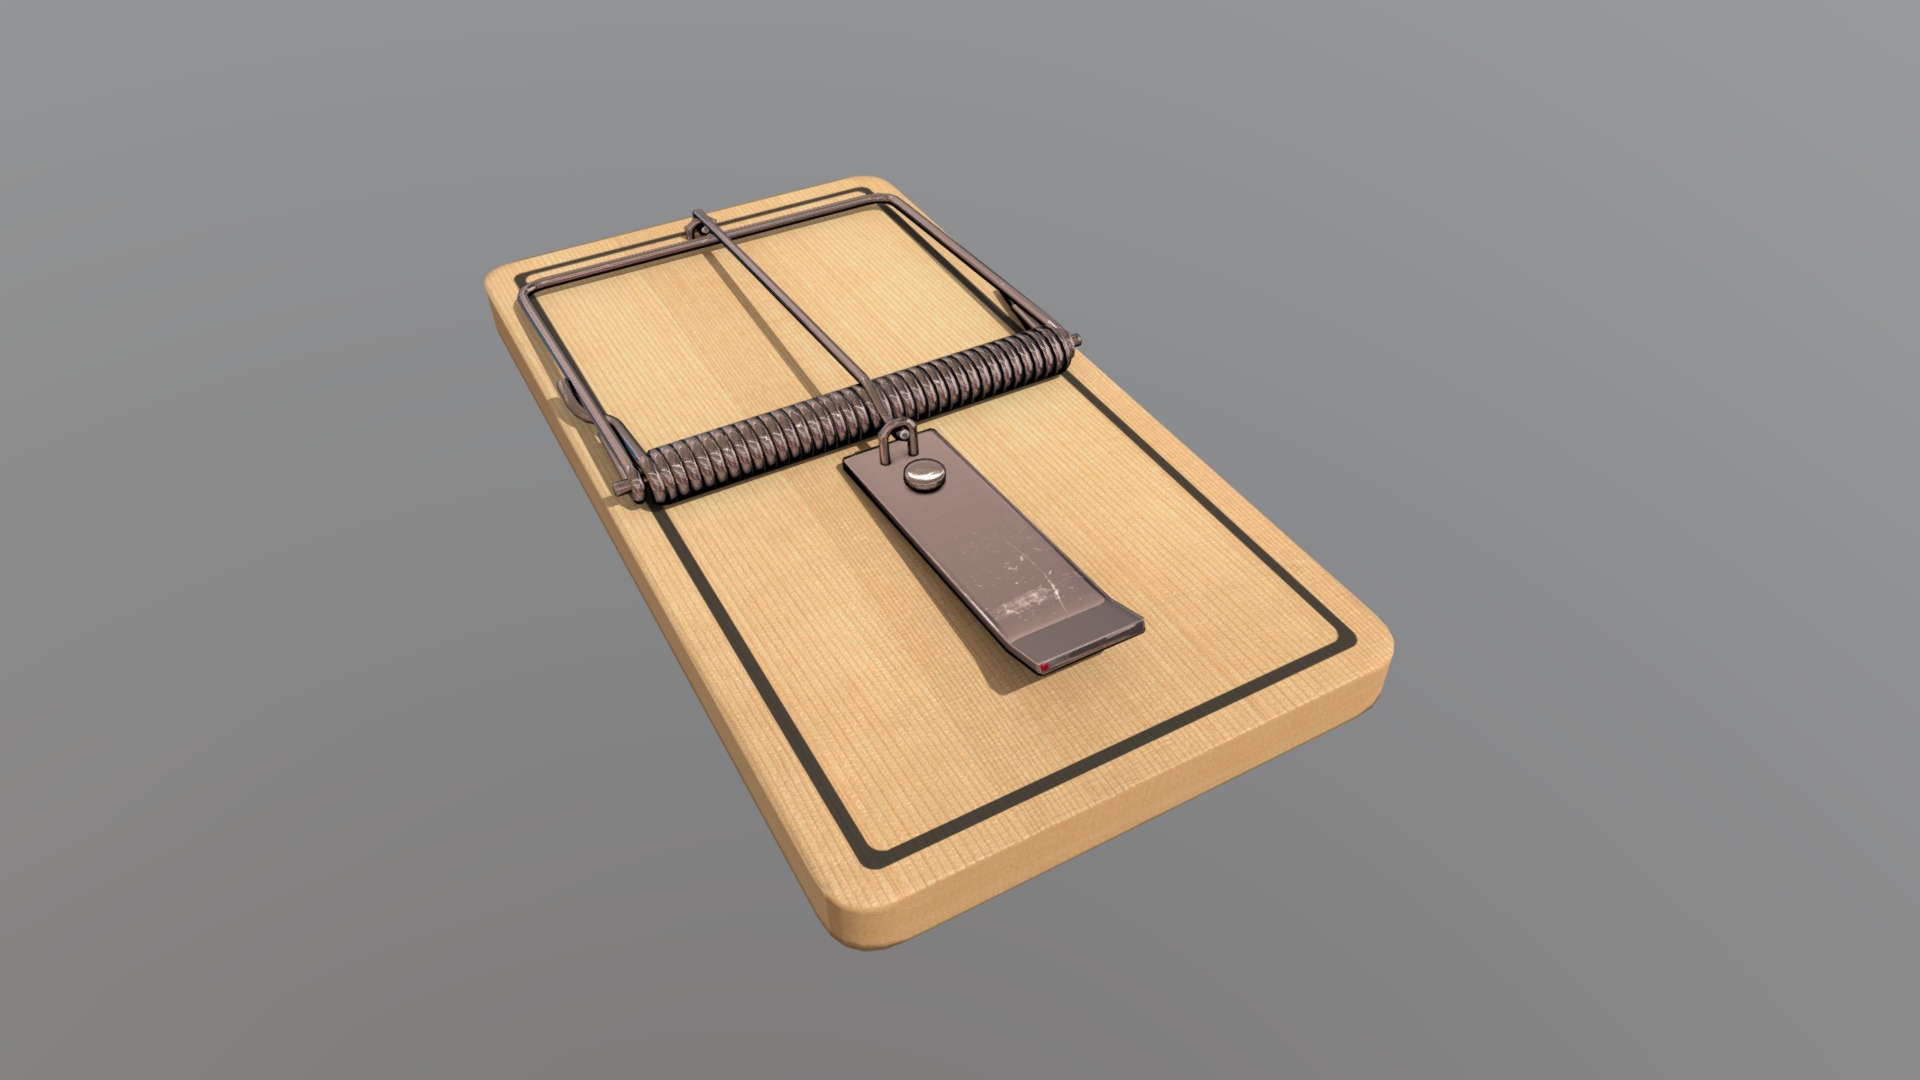 3D model Mousetrap - This is a 3D model of the Mousetrap. The 3D model is about a wallet with a phone in it.